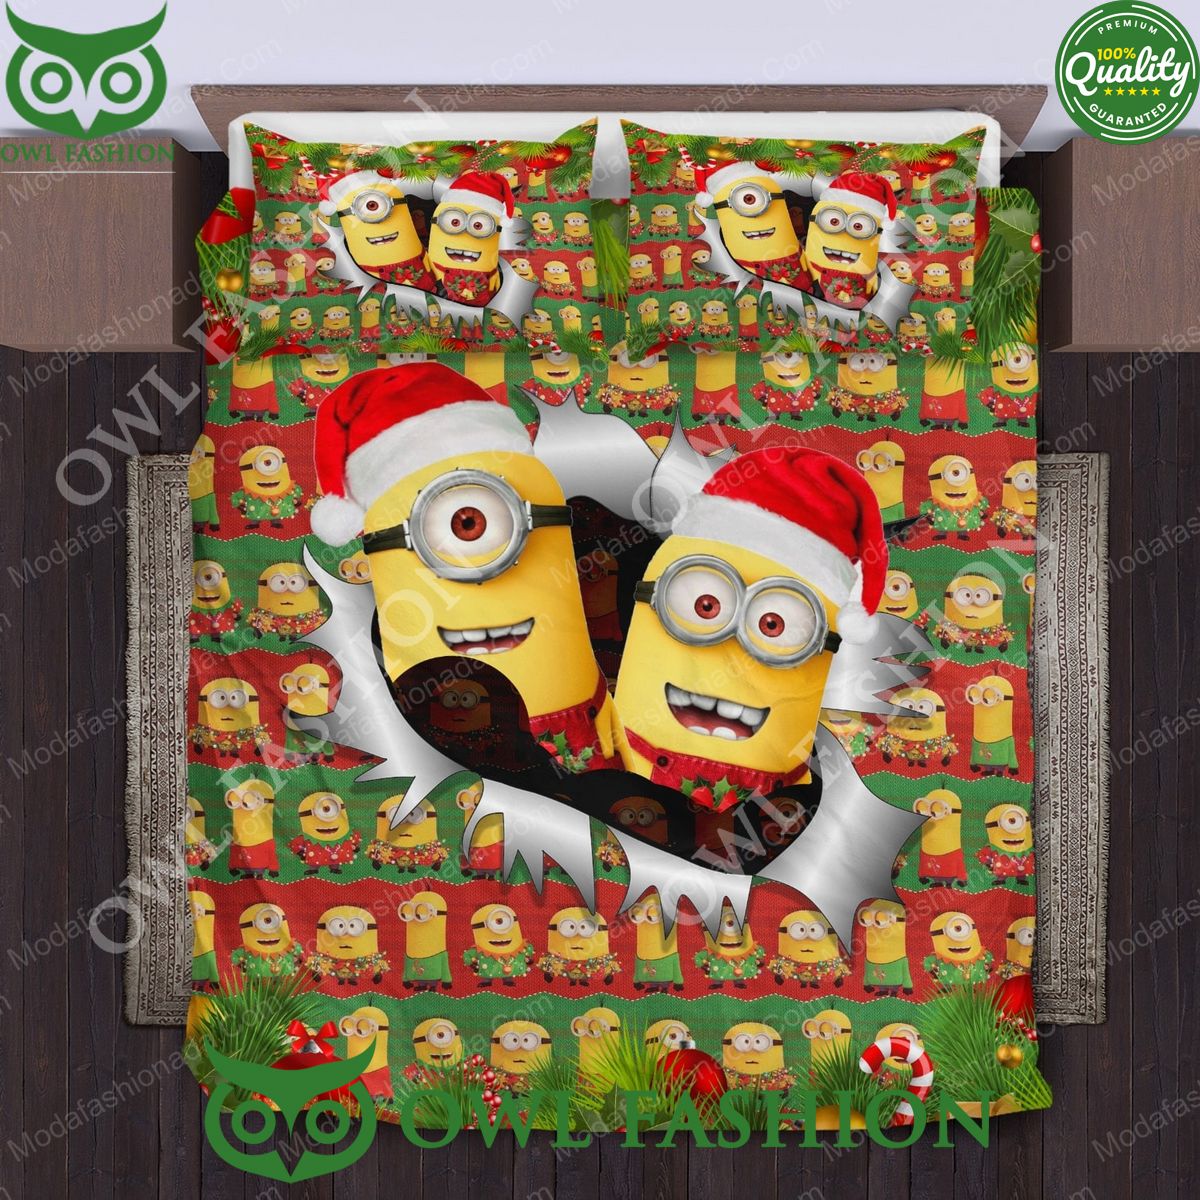 Minions Despicable Me Merry Christmas Limited Bedding Set